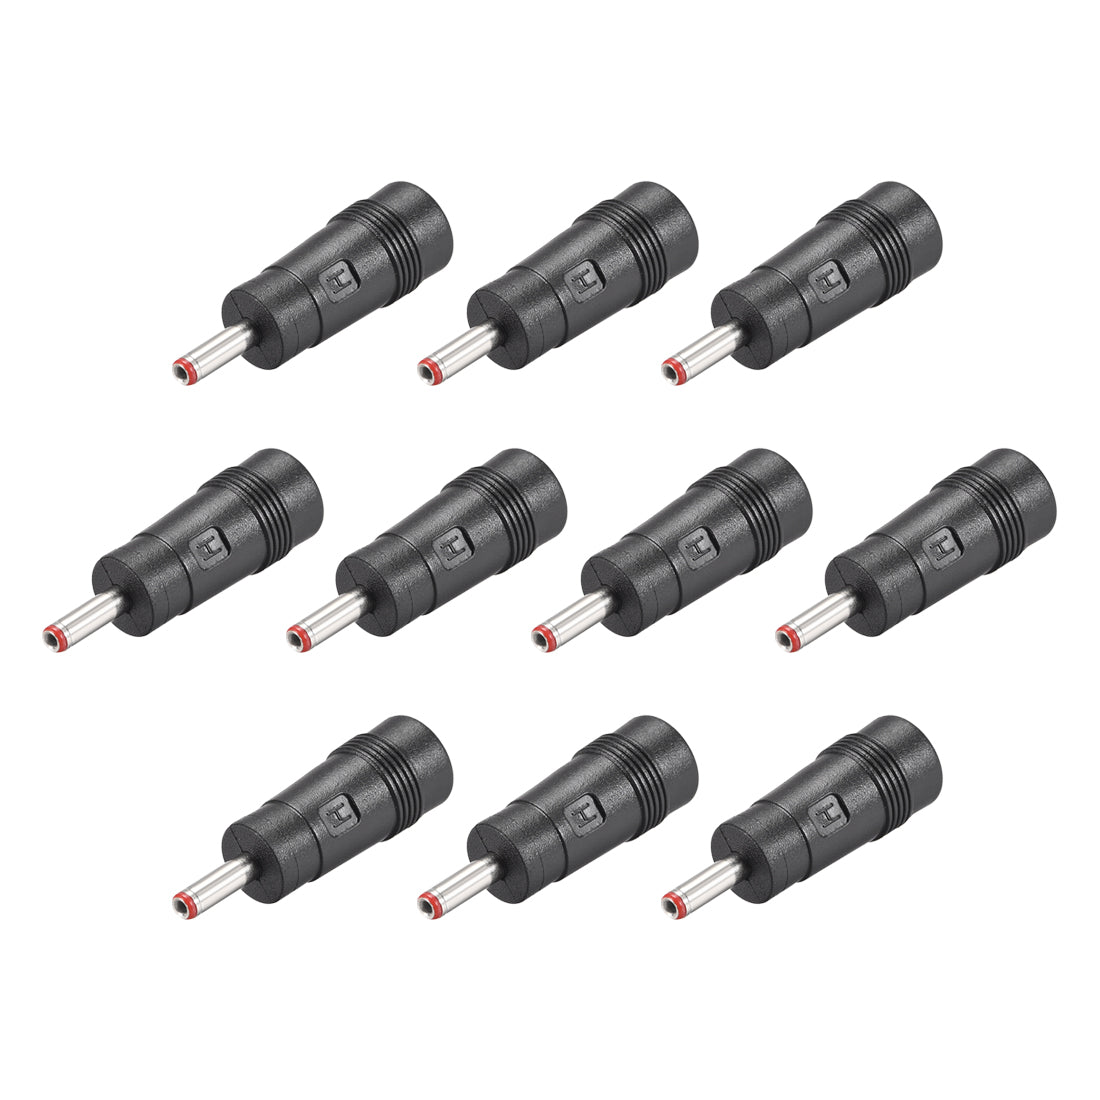 uxcell Uxcell 10pcs DC Power Converter 3.5mm x 1.35mm Male to 5.5mm x 2.5mm Female Adapter Connector